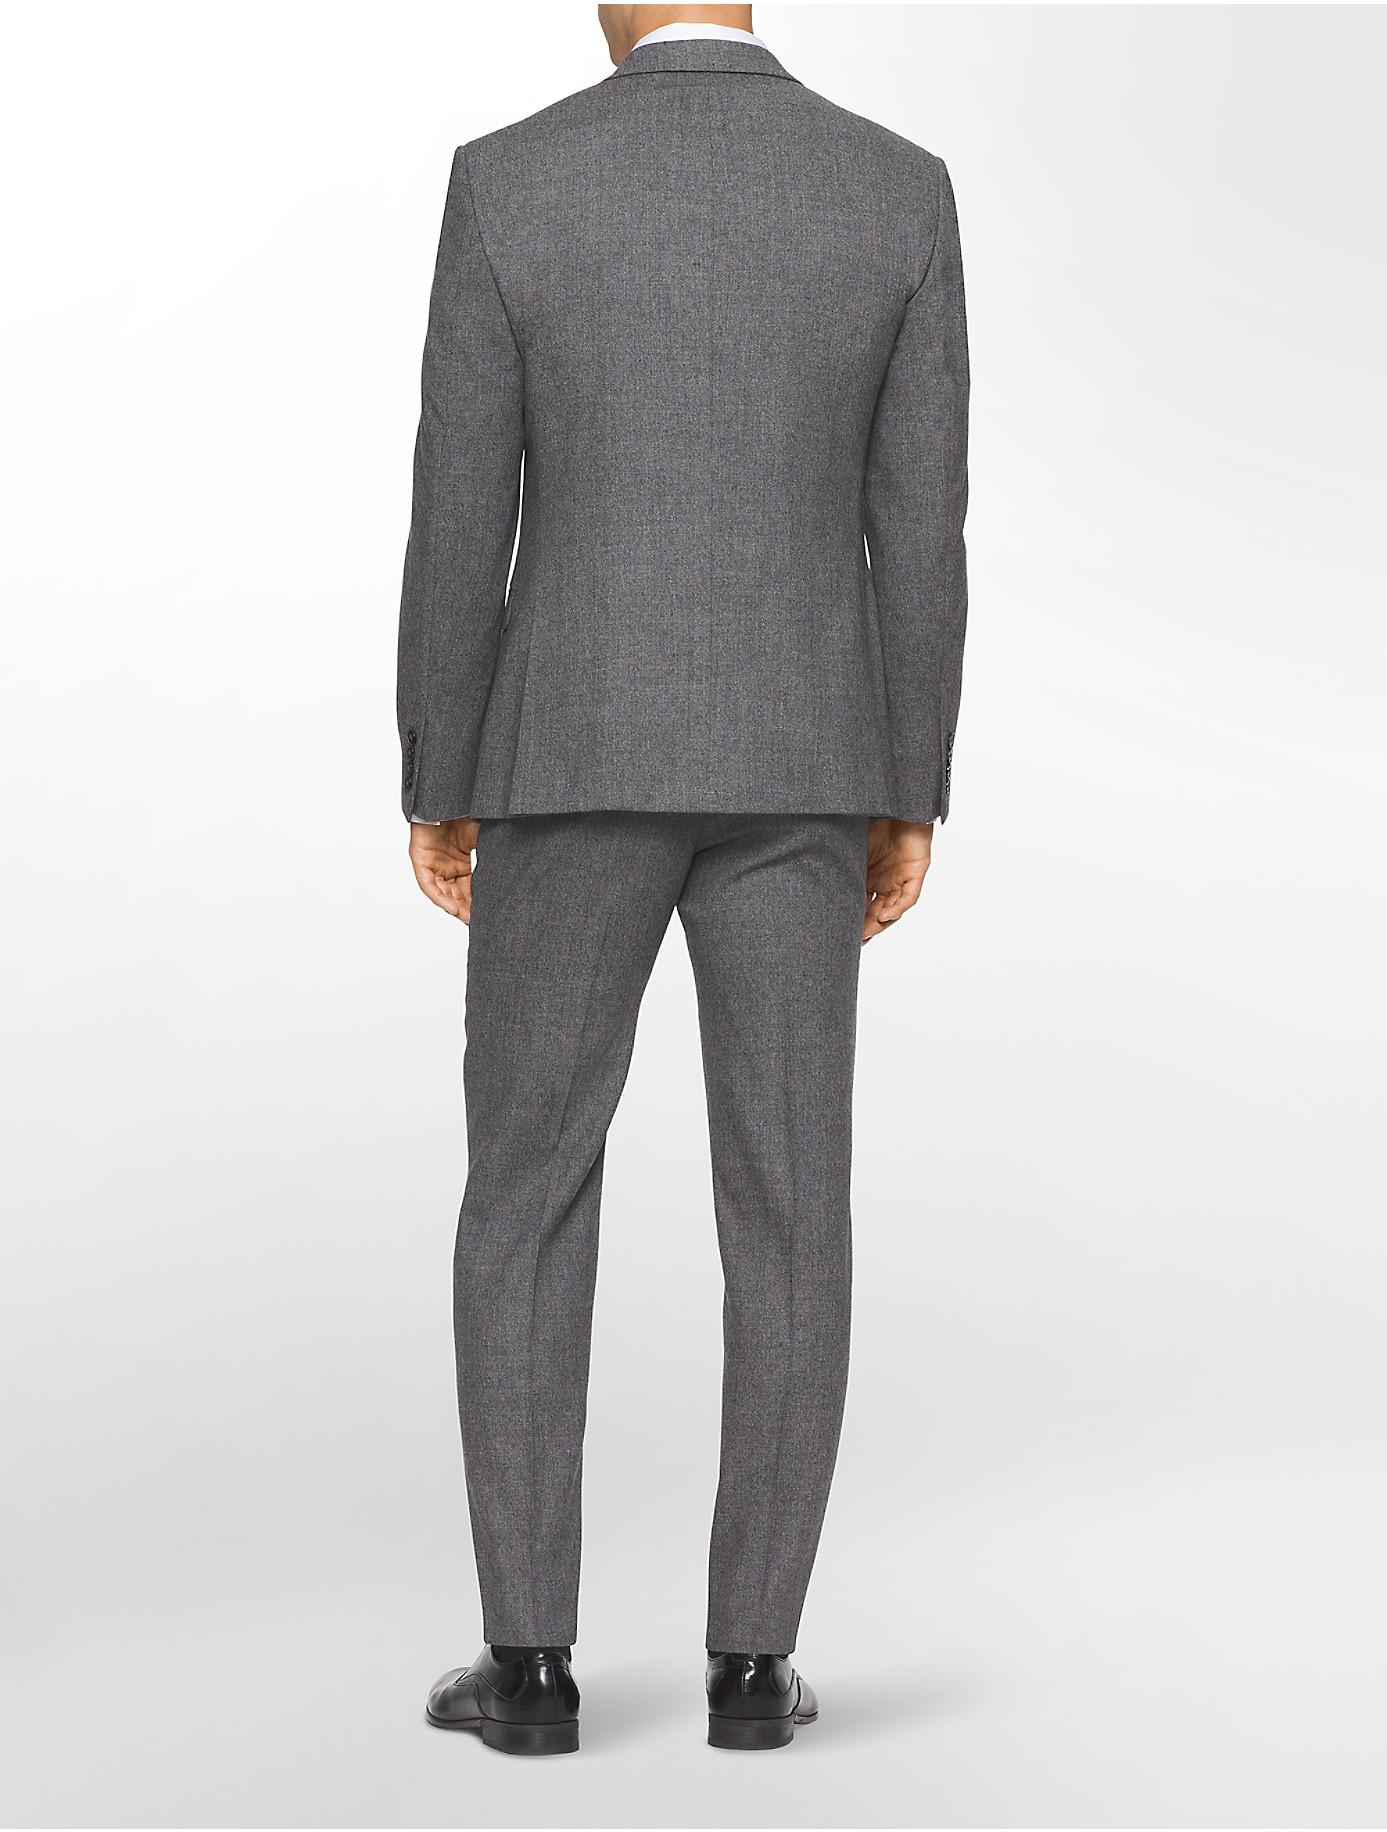 Calvin Klein Wool X Fit Ultra Slim Fit Donegal Suit Jacket in Grey (Gray)  for Men - Lyst